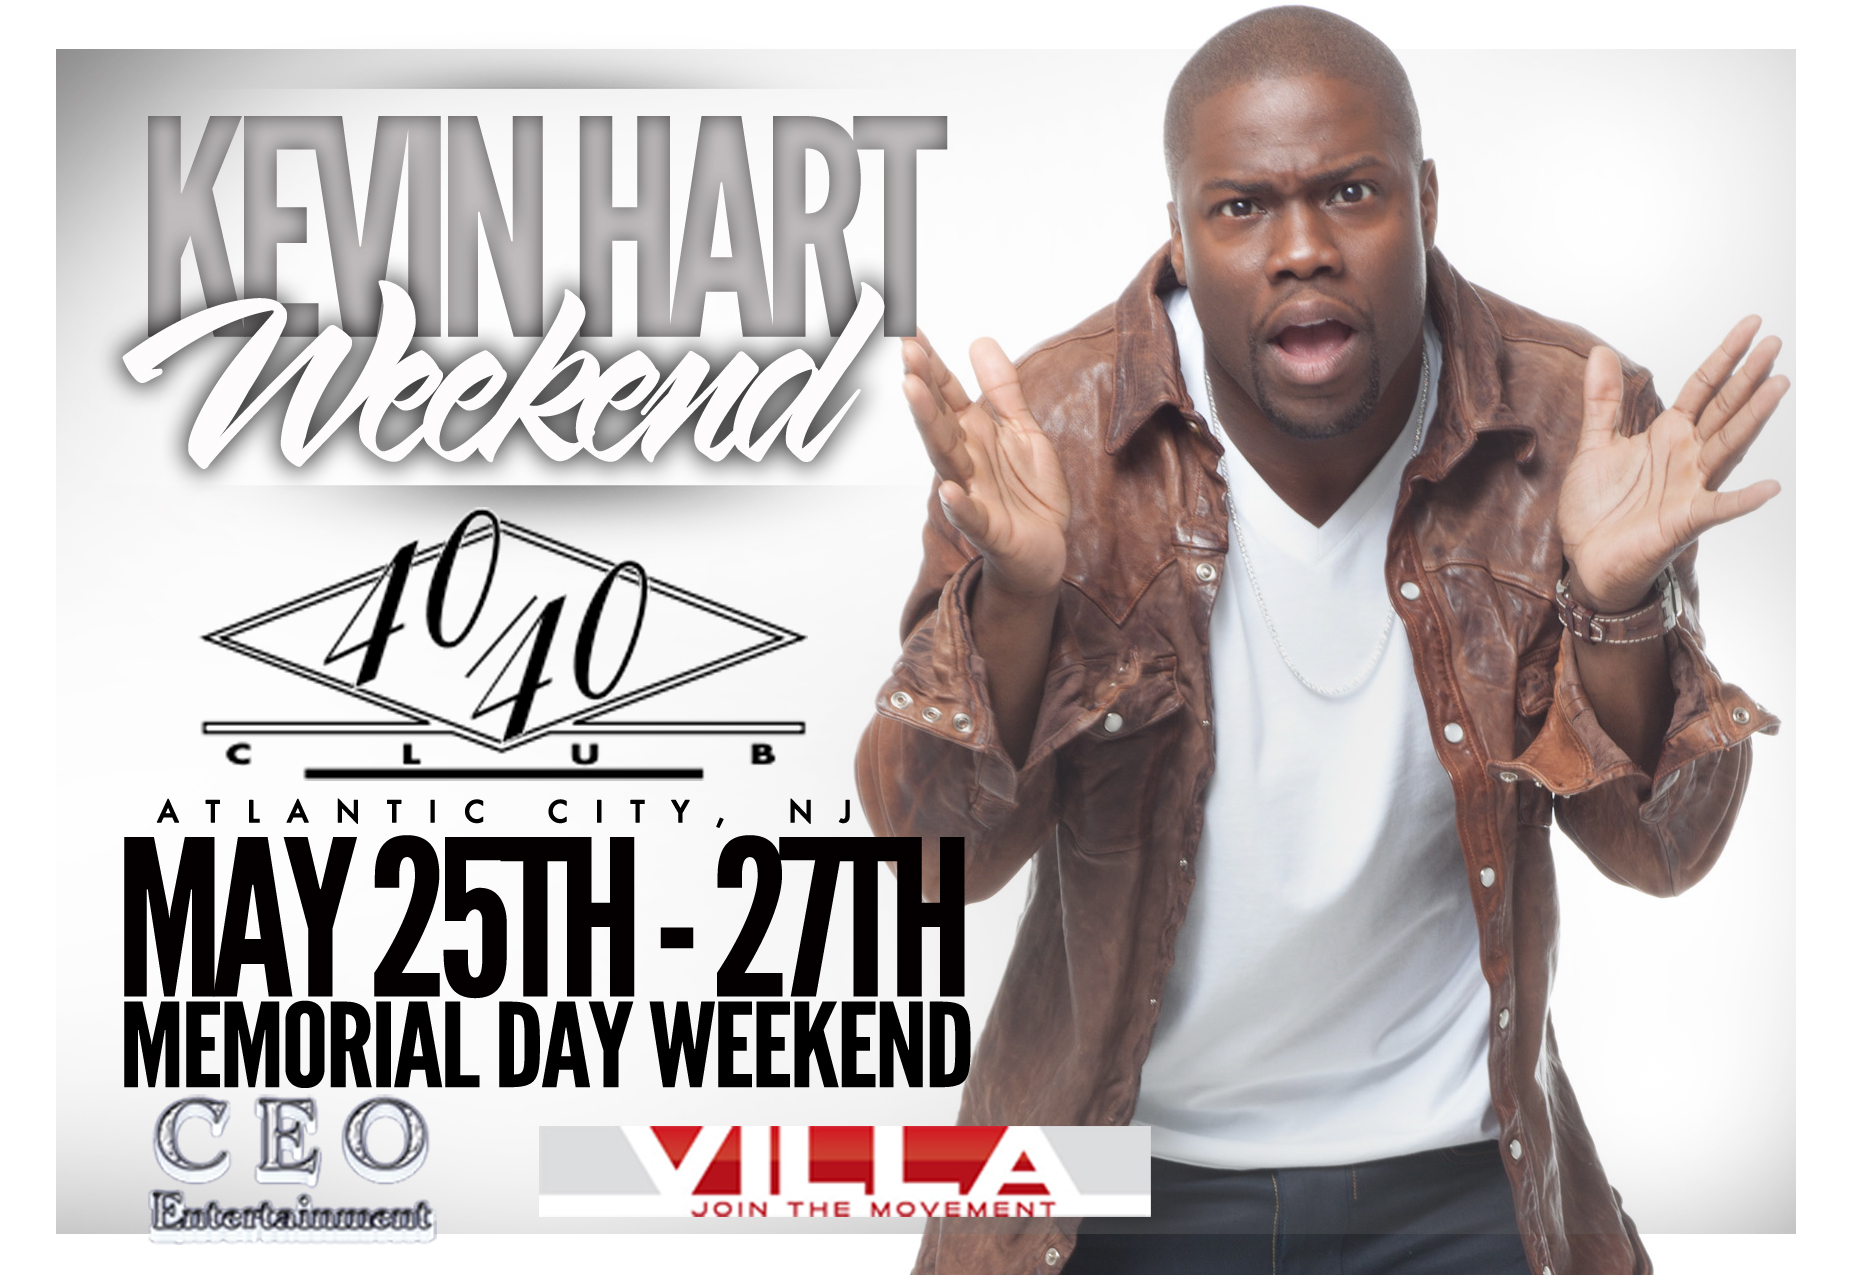 Kevin Hart Weekend May 25th27th in Atlantic City (Event Details Inside